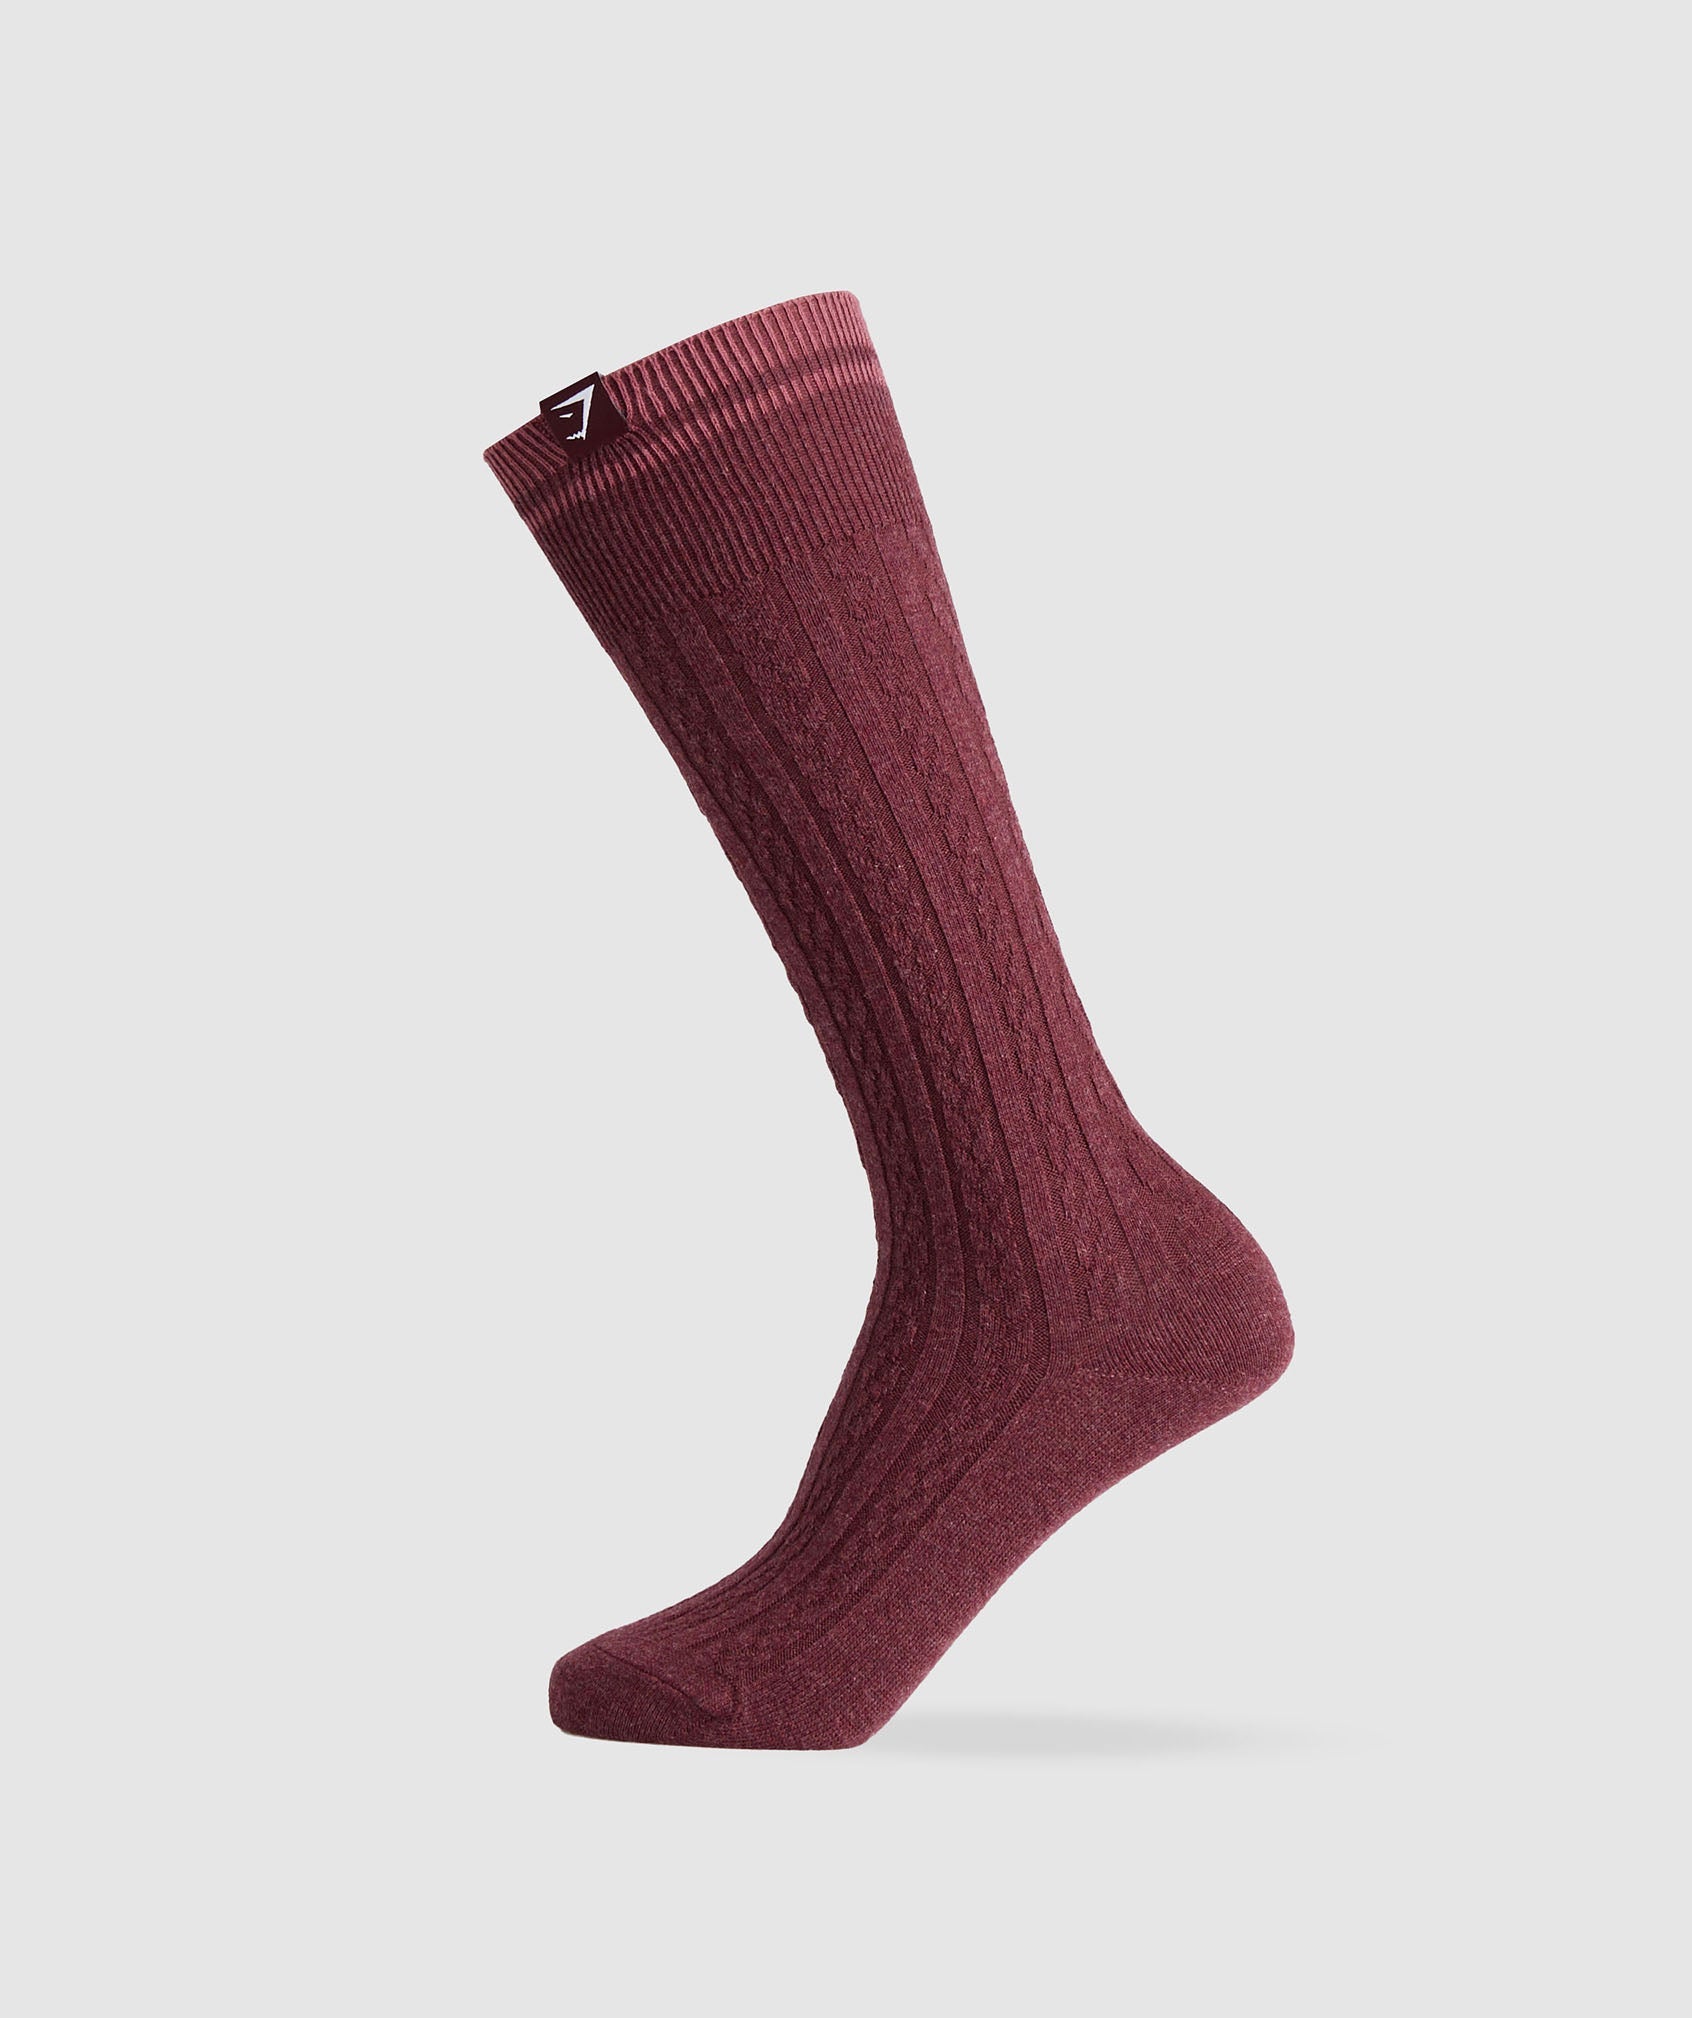 Rest Day Cable Socks in Rich Maroon Marl/Burgundy Brown/Soft Berry - view 1